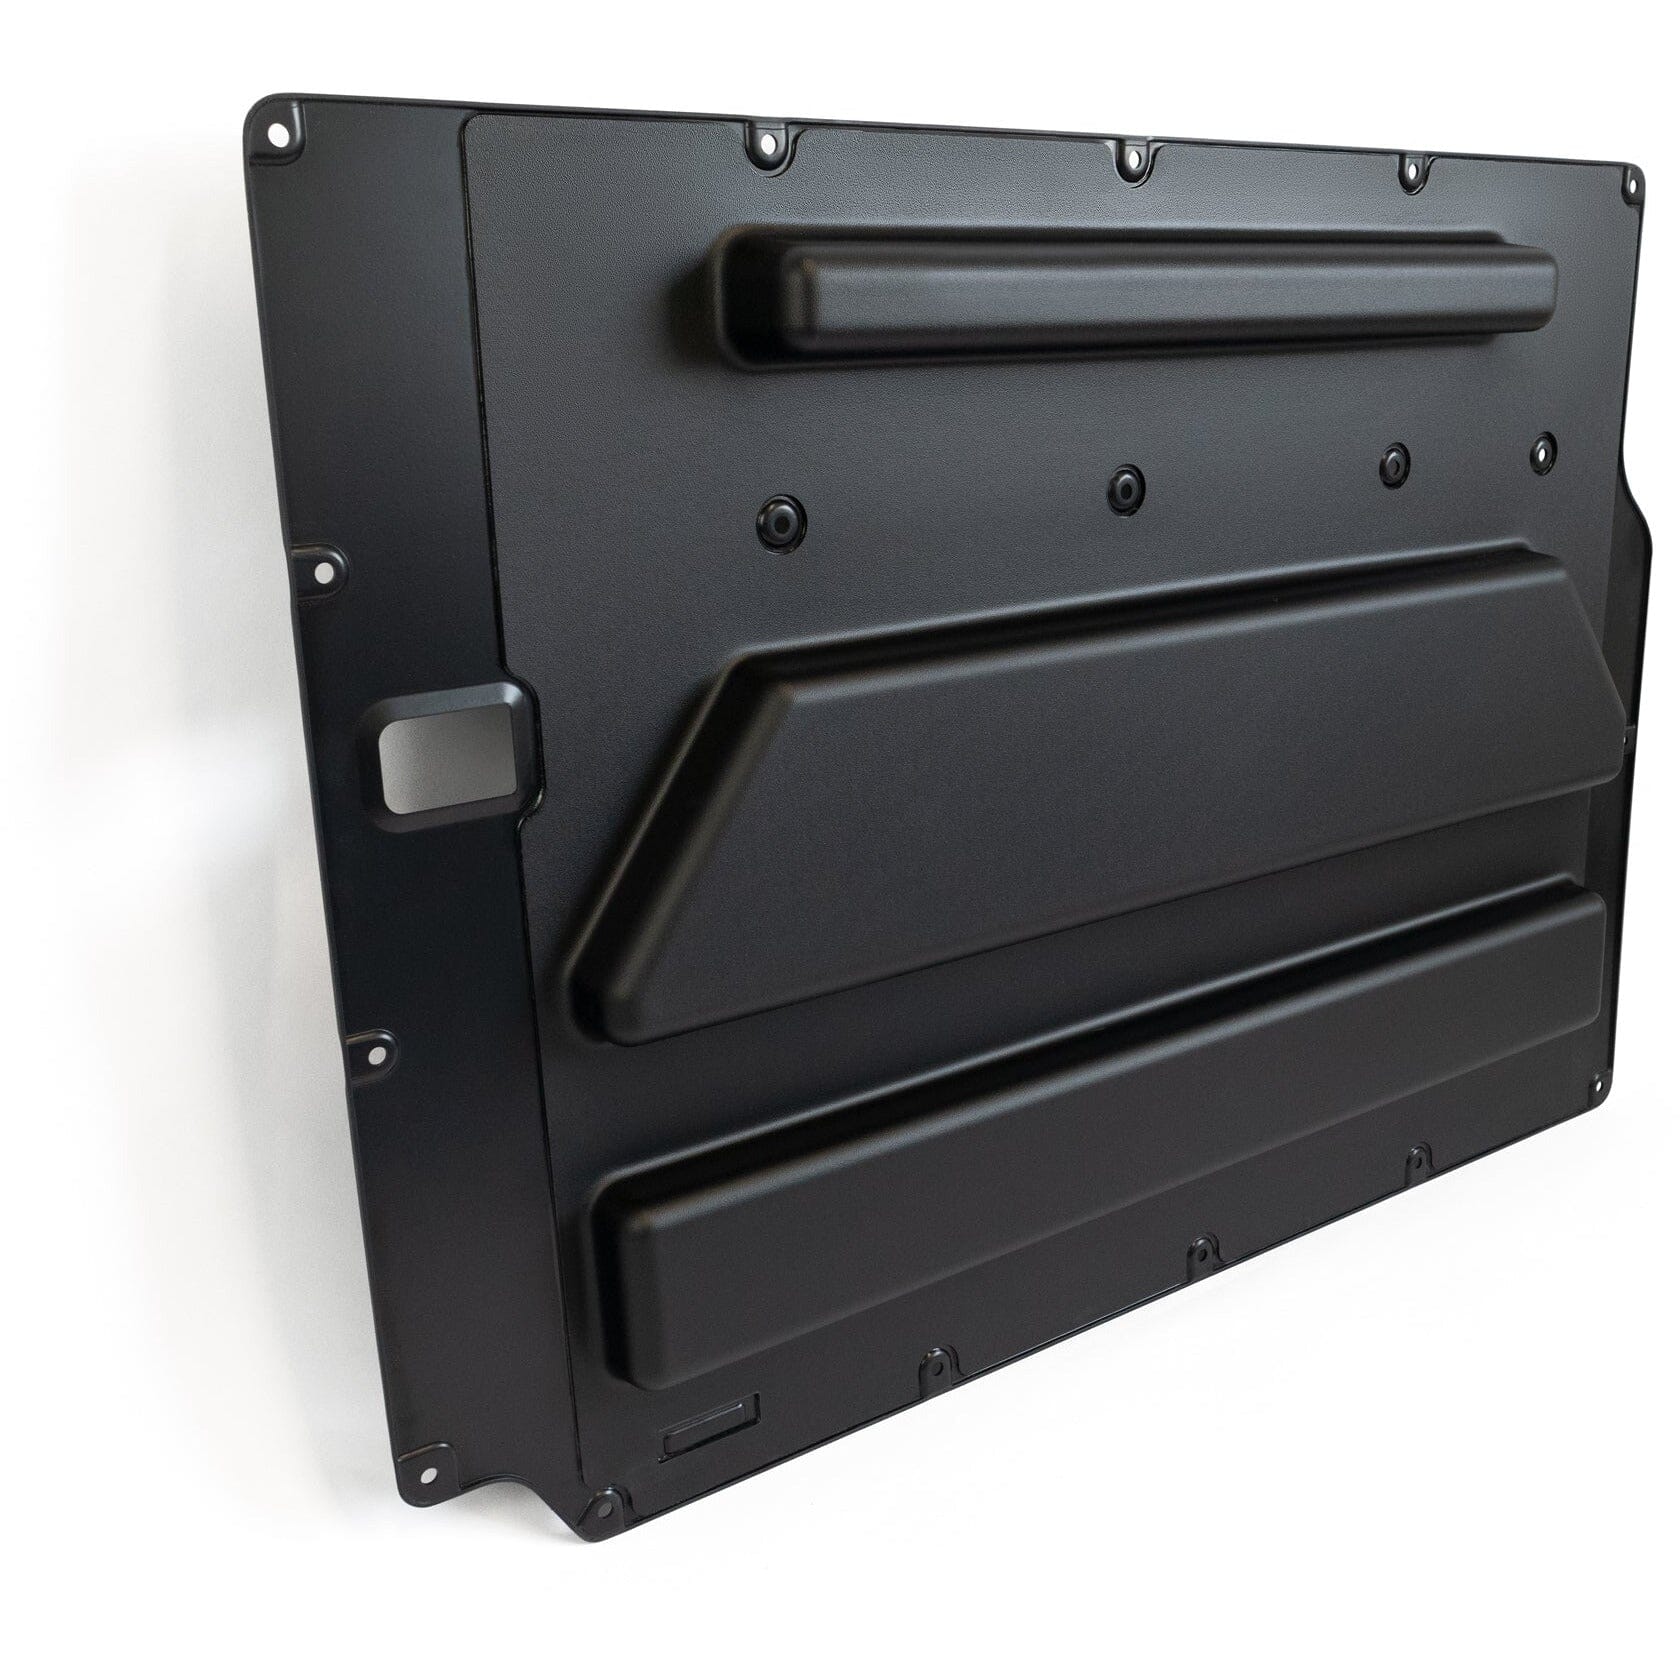 Left + Right Bundle - VW T4 DoorStores - Maximise Your VW's Storage Space with a Pair of DoorStores Designed by Kiravans 